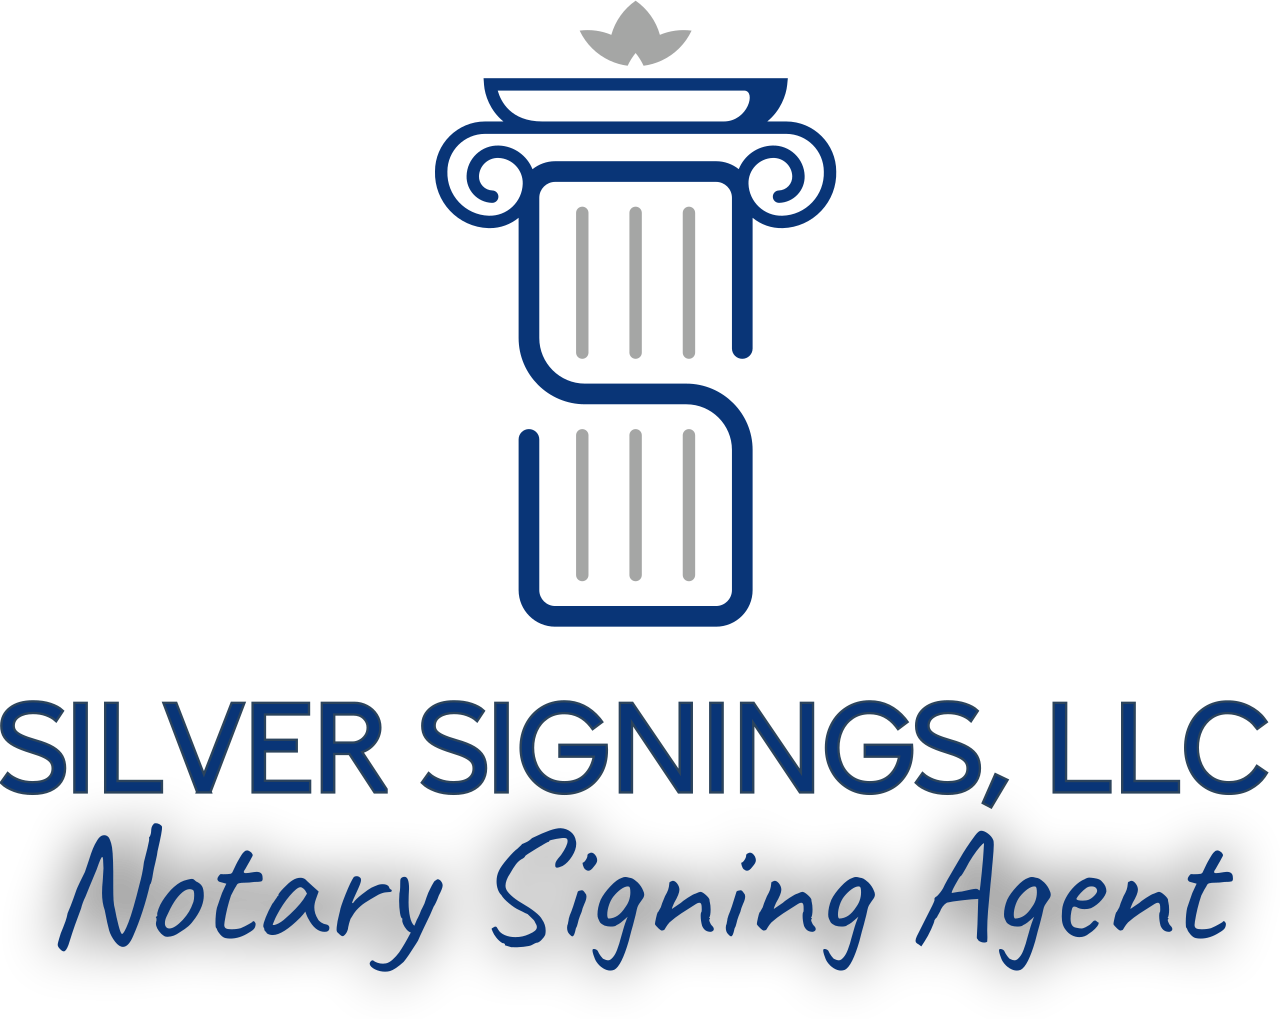 Silver Signings, LLC's web page